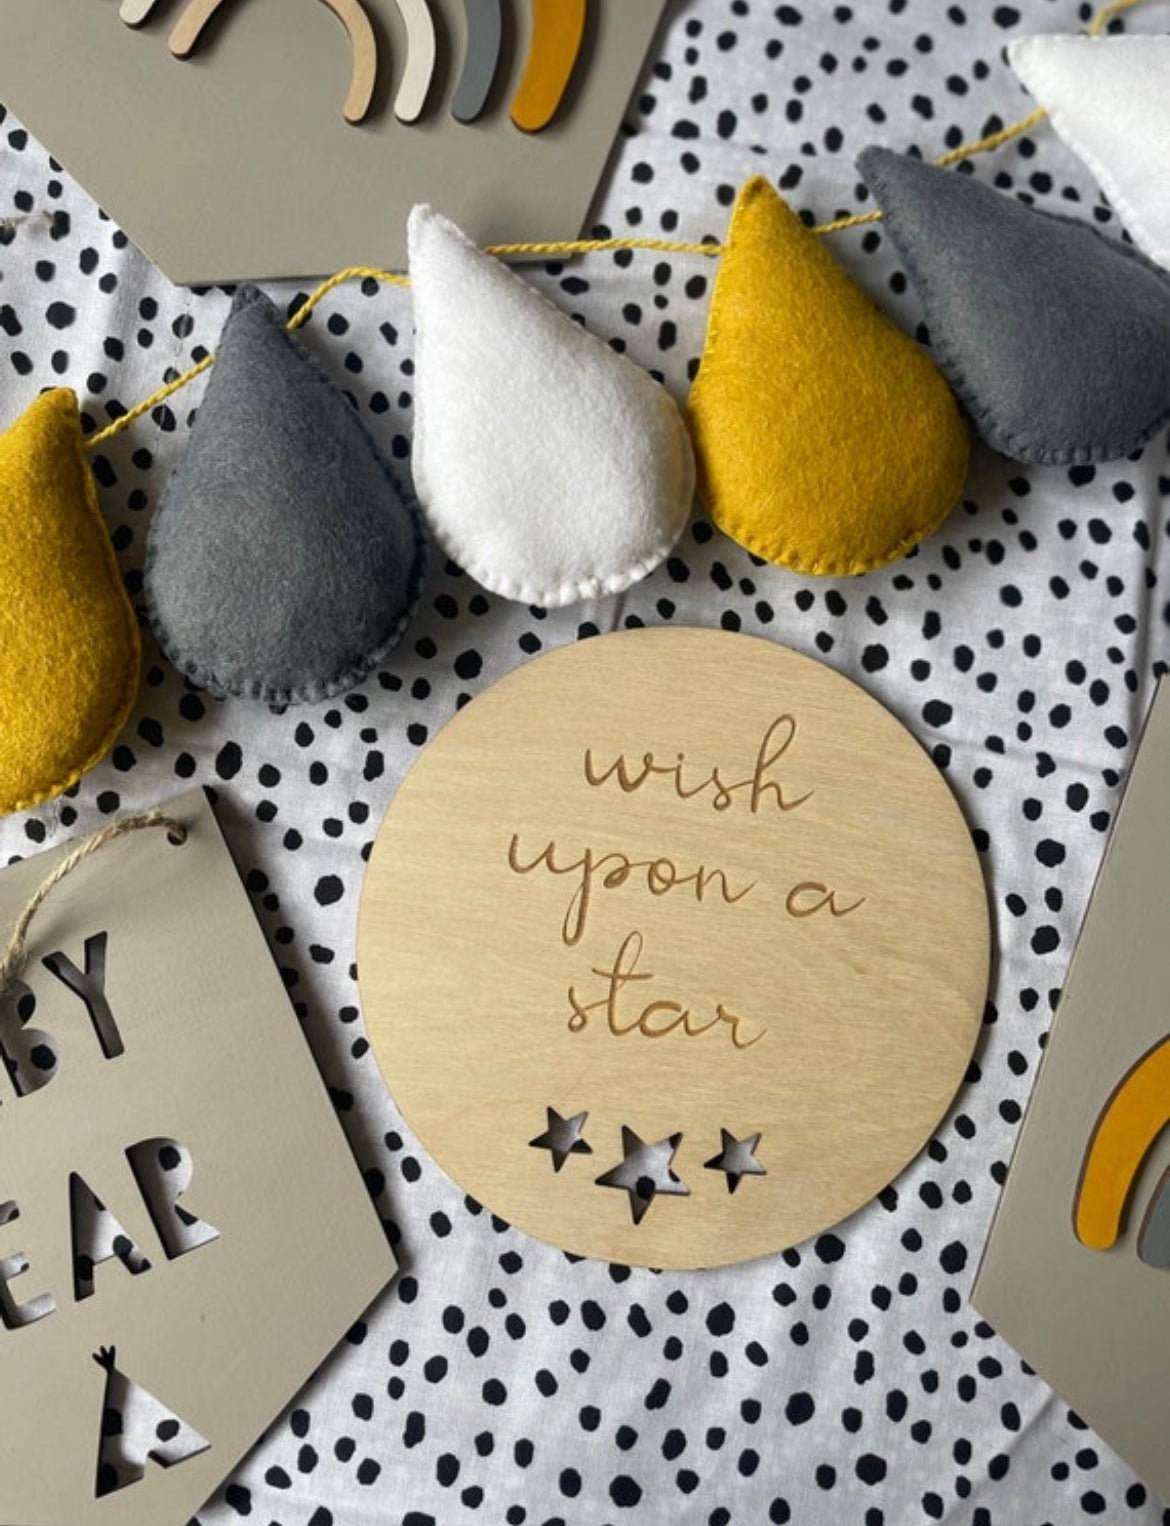 Wish upon a star Wooden Circle Plaque